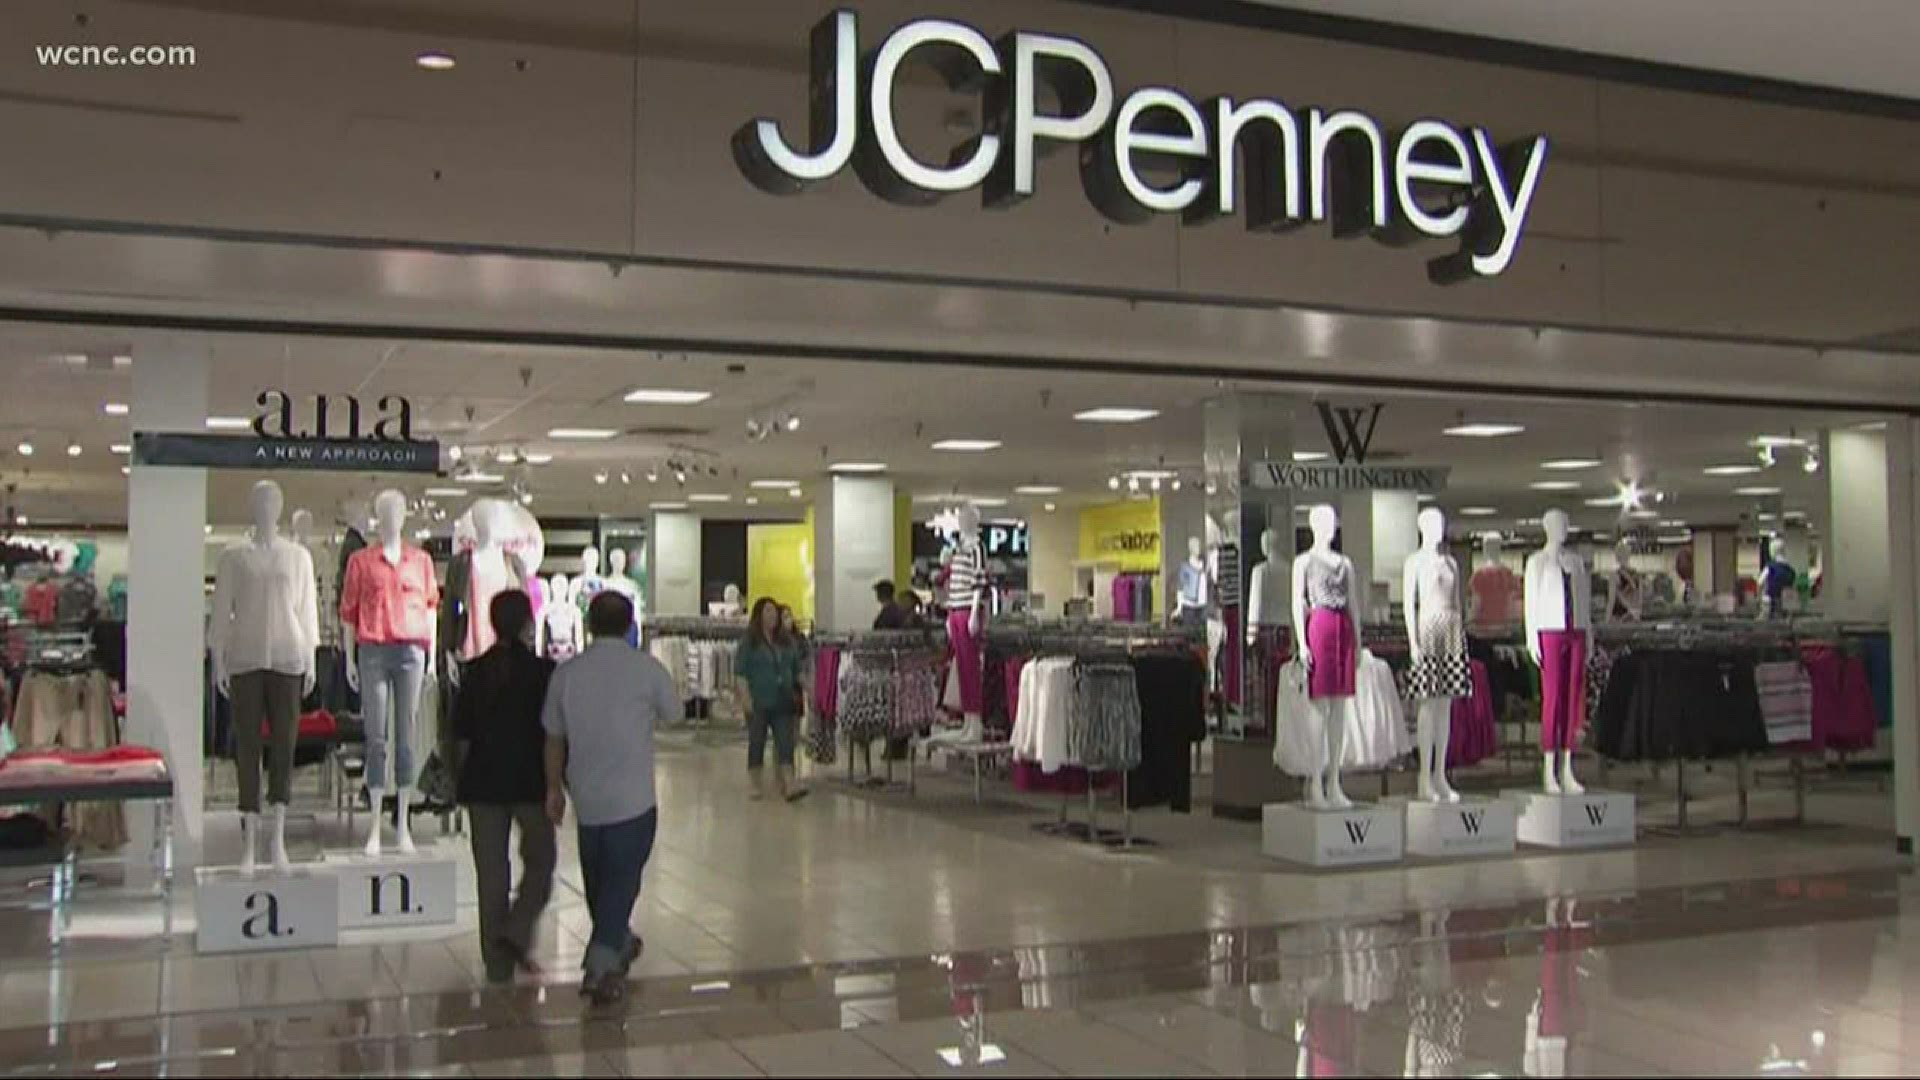 A real-estate services firm says that over 50% of department stores in malls are predicted to close by 2021 due to the pandemic.